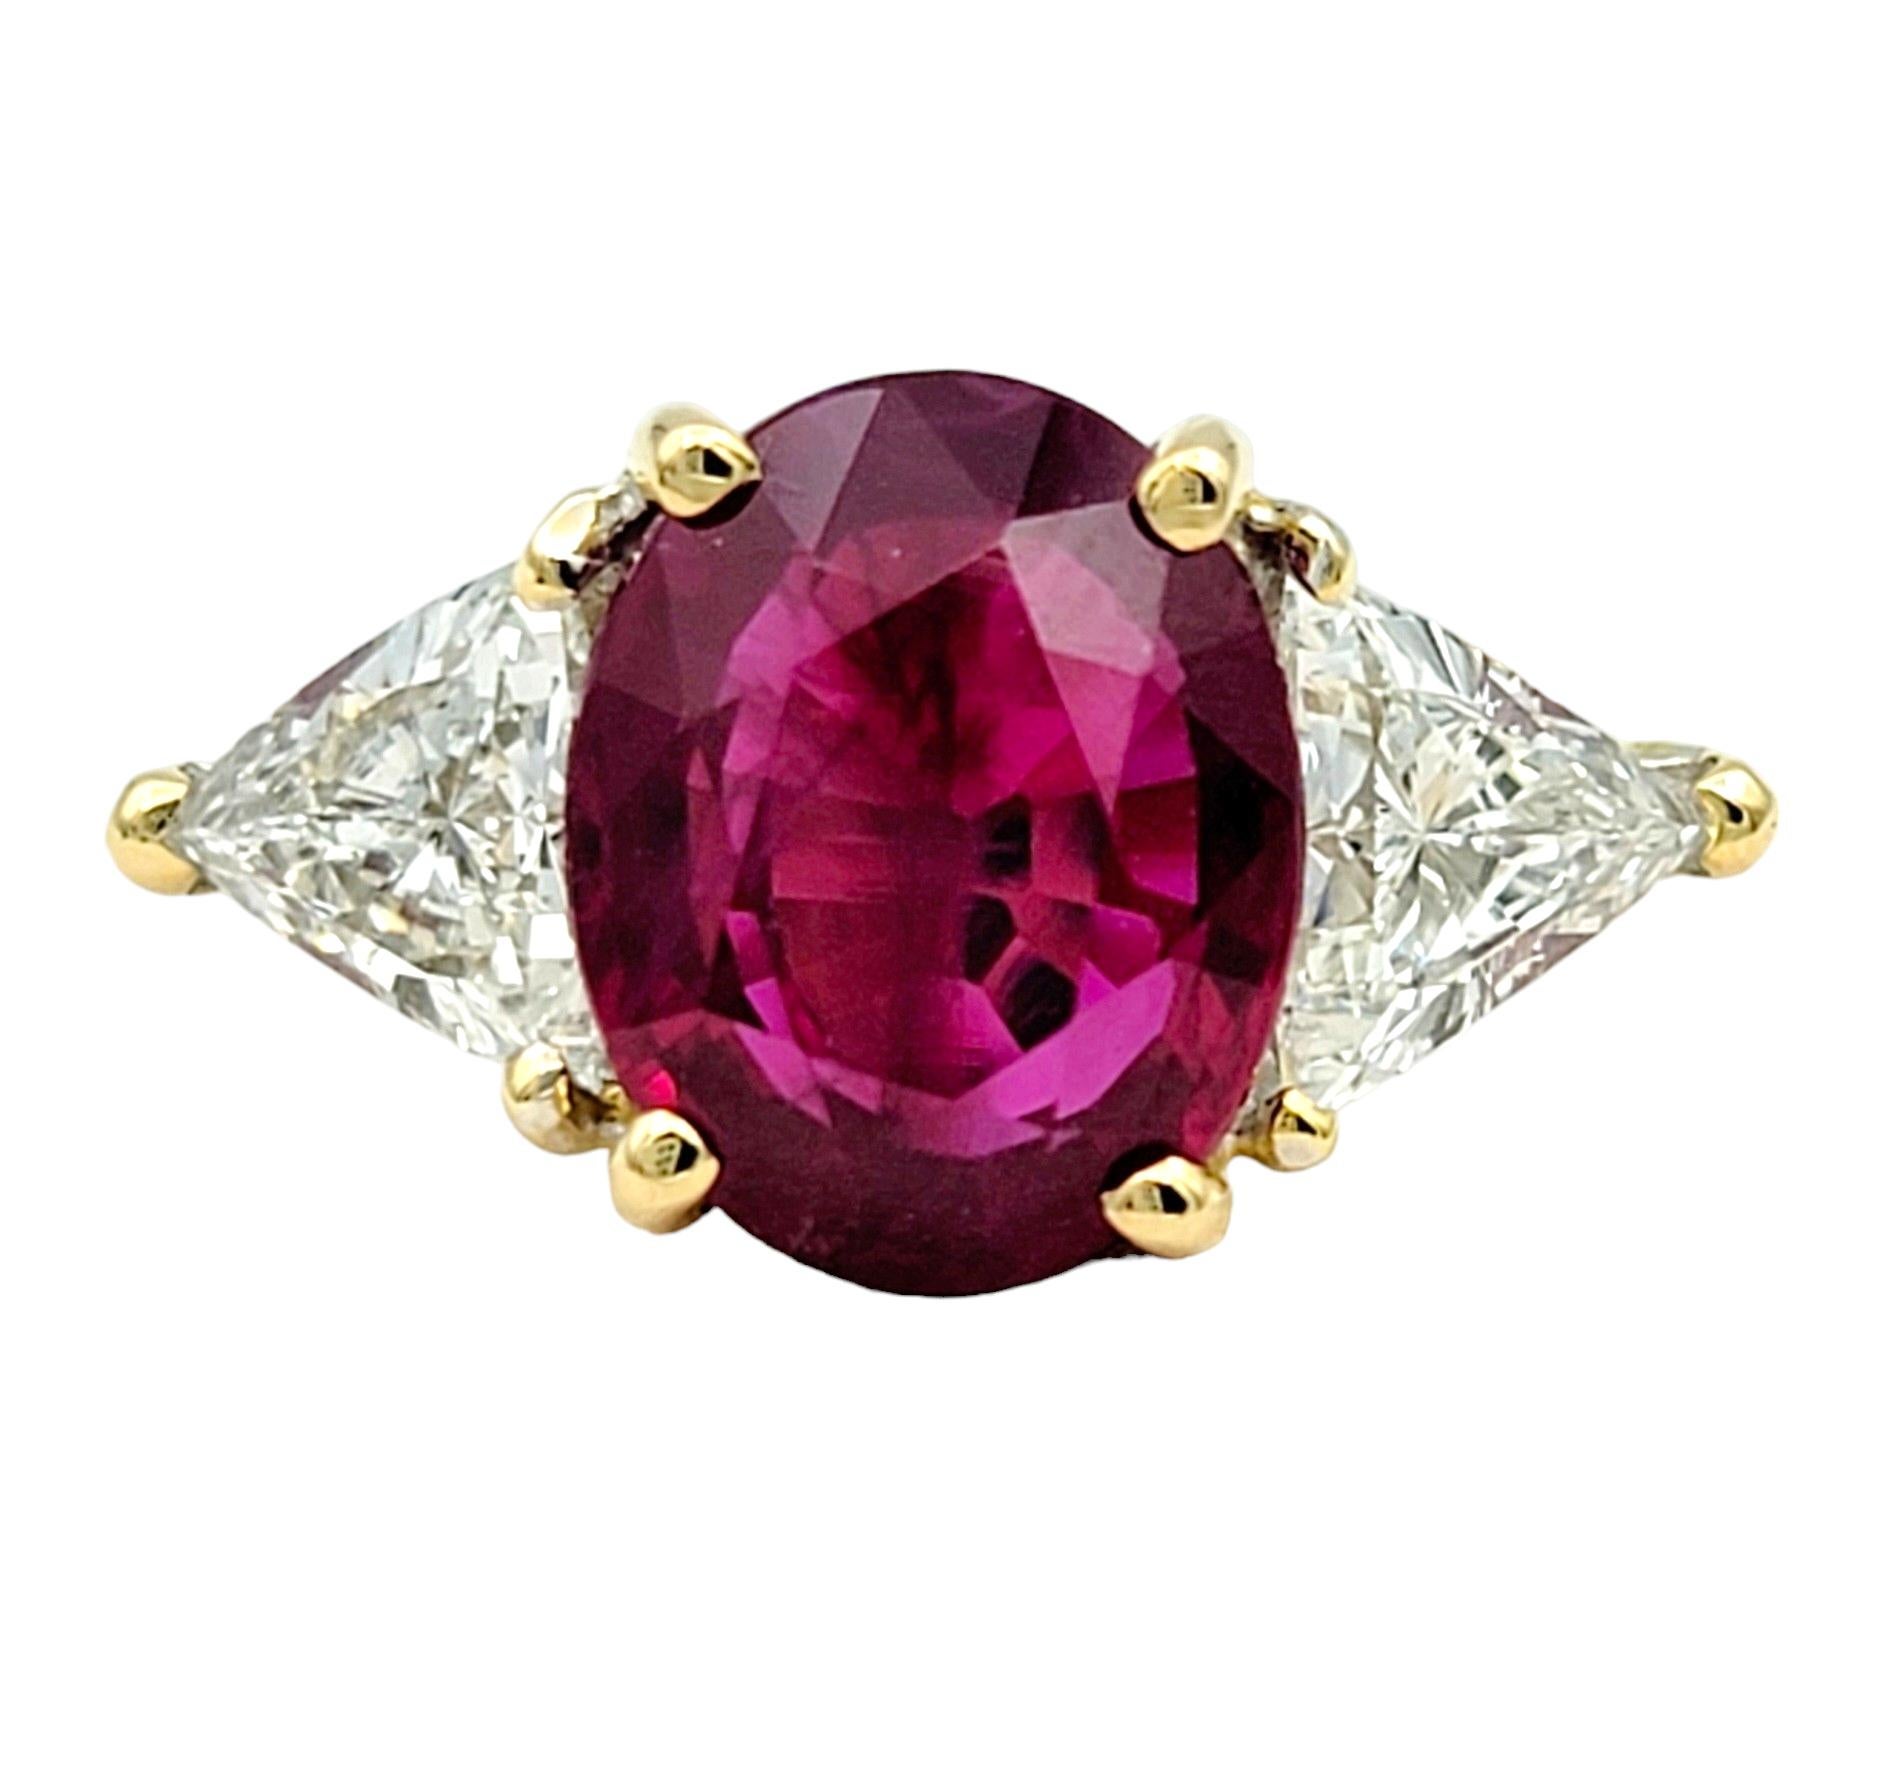 Ring Size: 6

This exquisite ring features a stunning and rare oval cut Burma ruby at its center, set in luxurious 18 karat yellow gold. The vibrant hue of the natural ruby radiates warmth and elegance, capturing attention with its rich color and